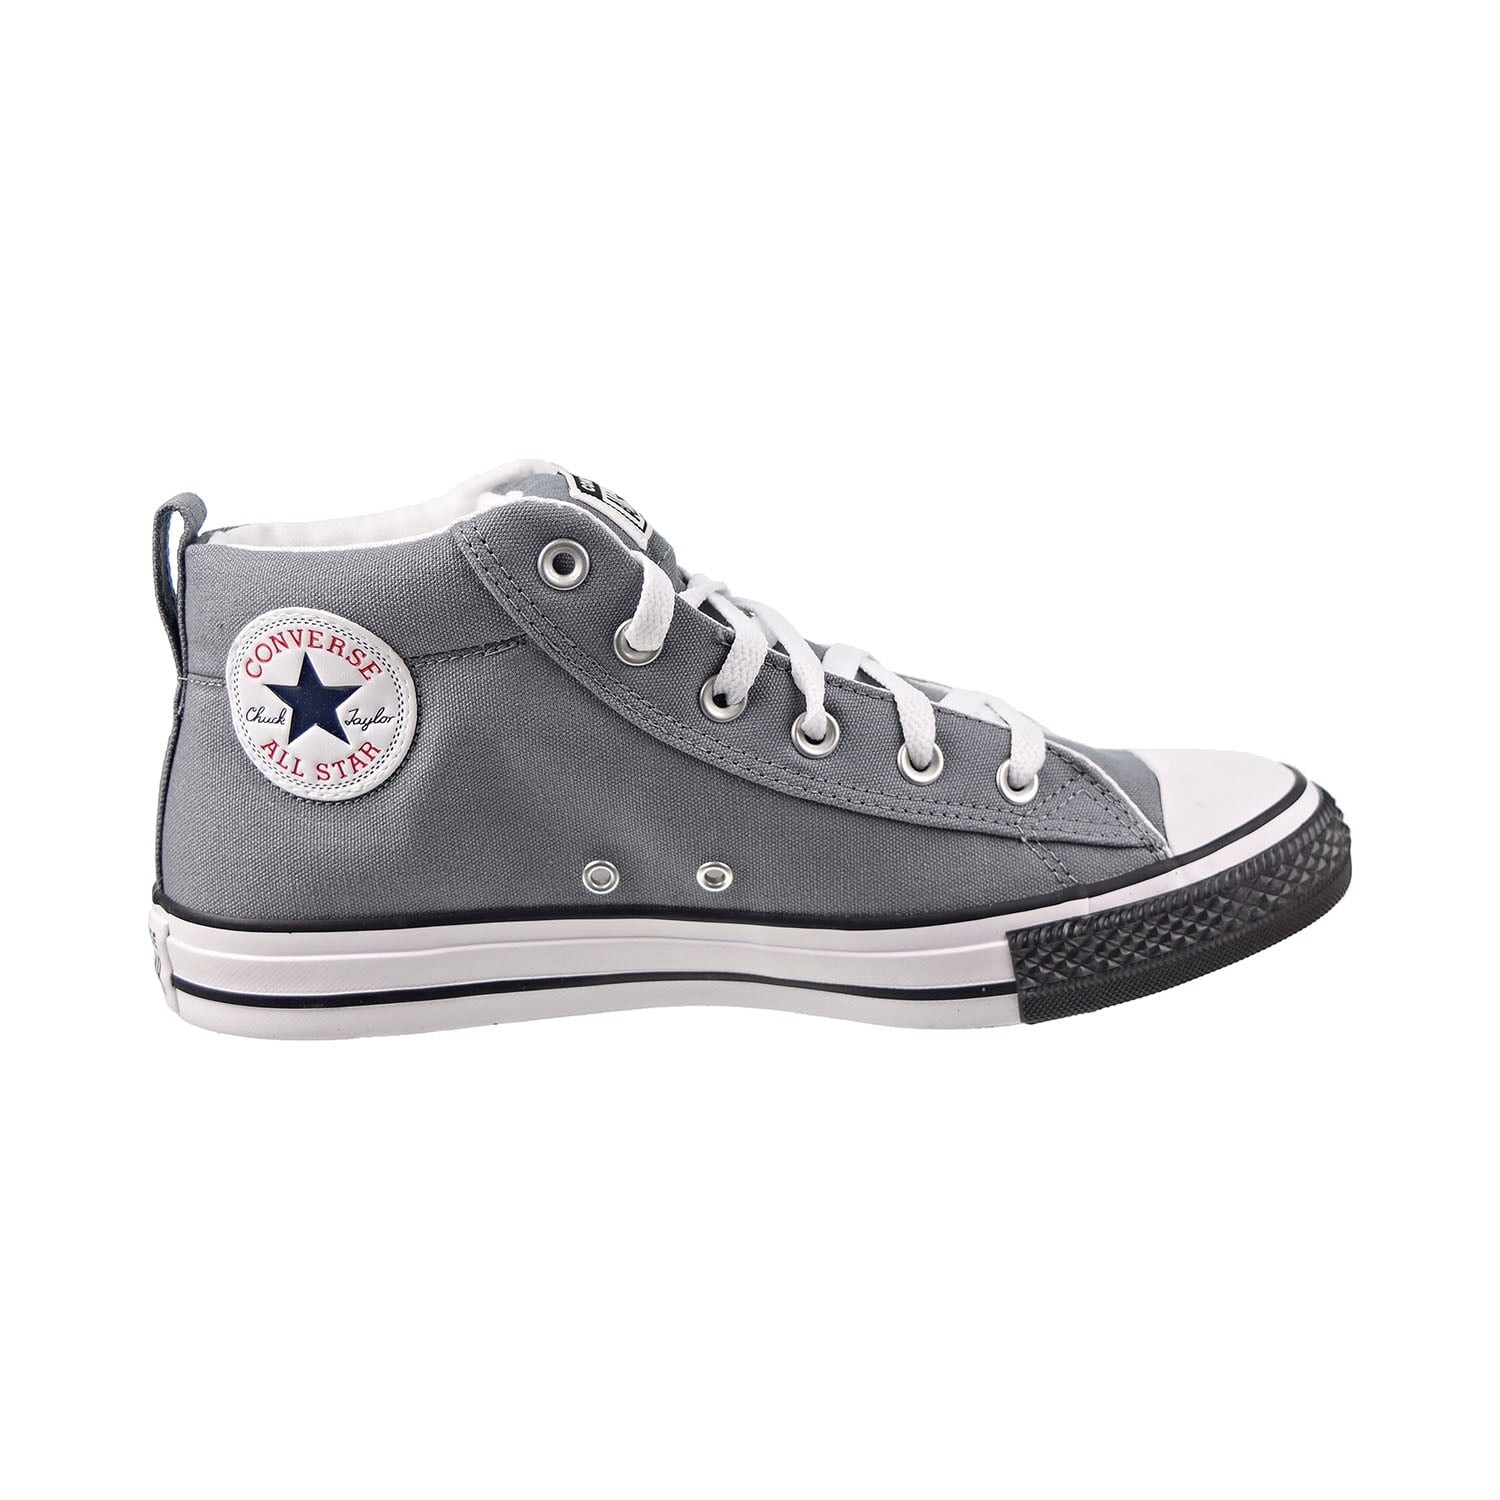 Converse Chuck Taylor All Star Street Mid Men's Shoes Cool Grey-White-Black  166338f